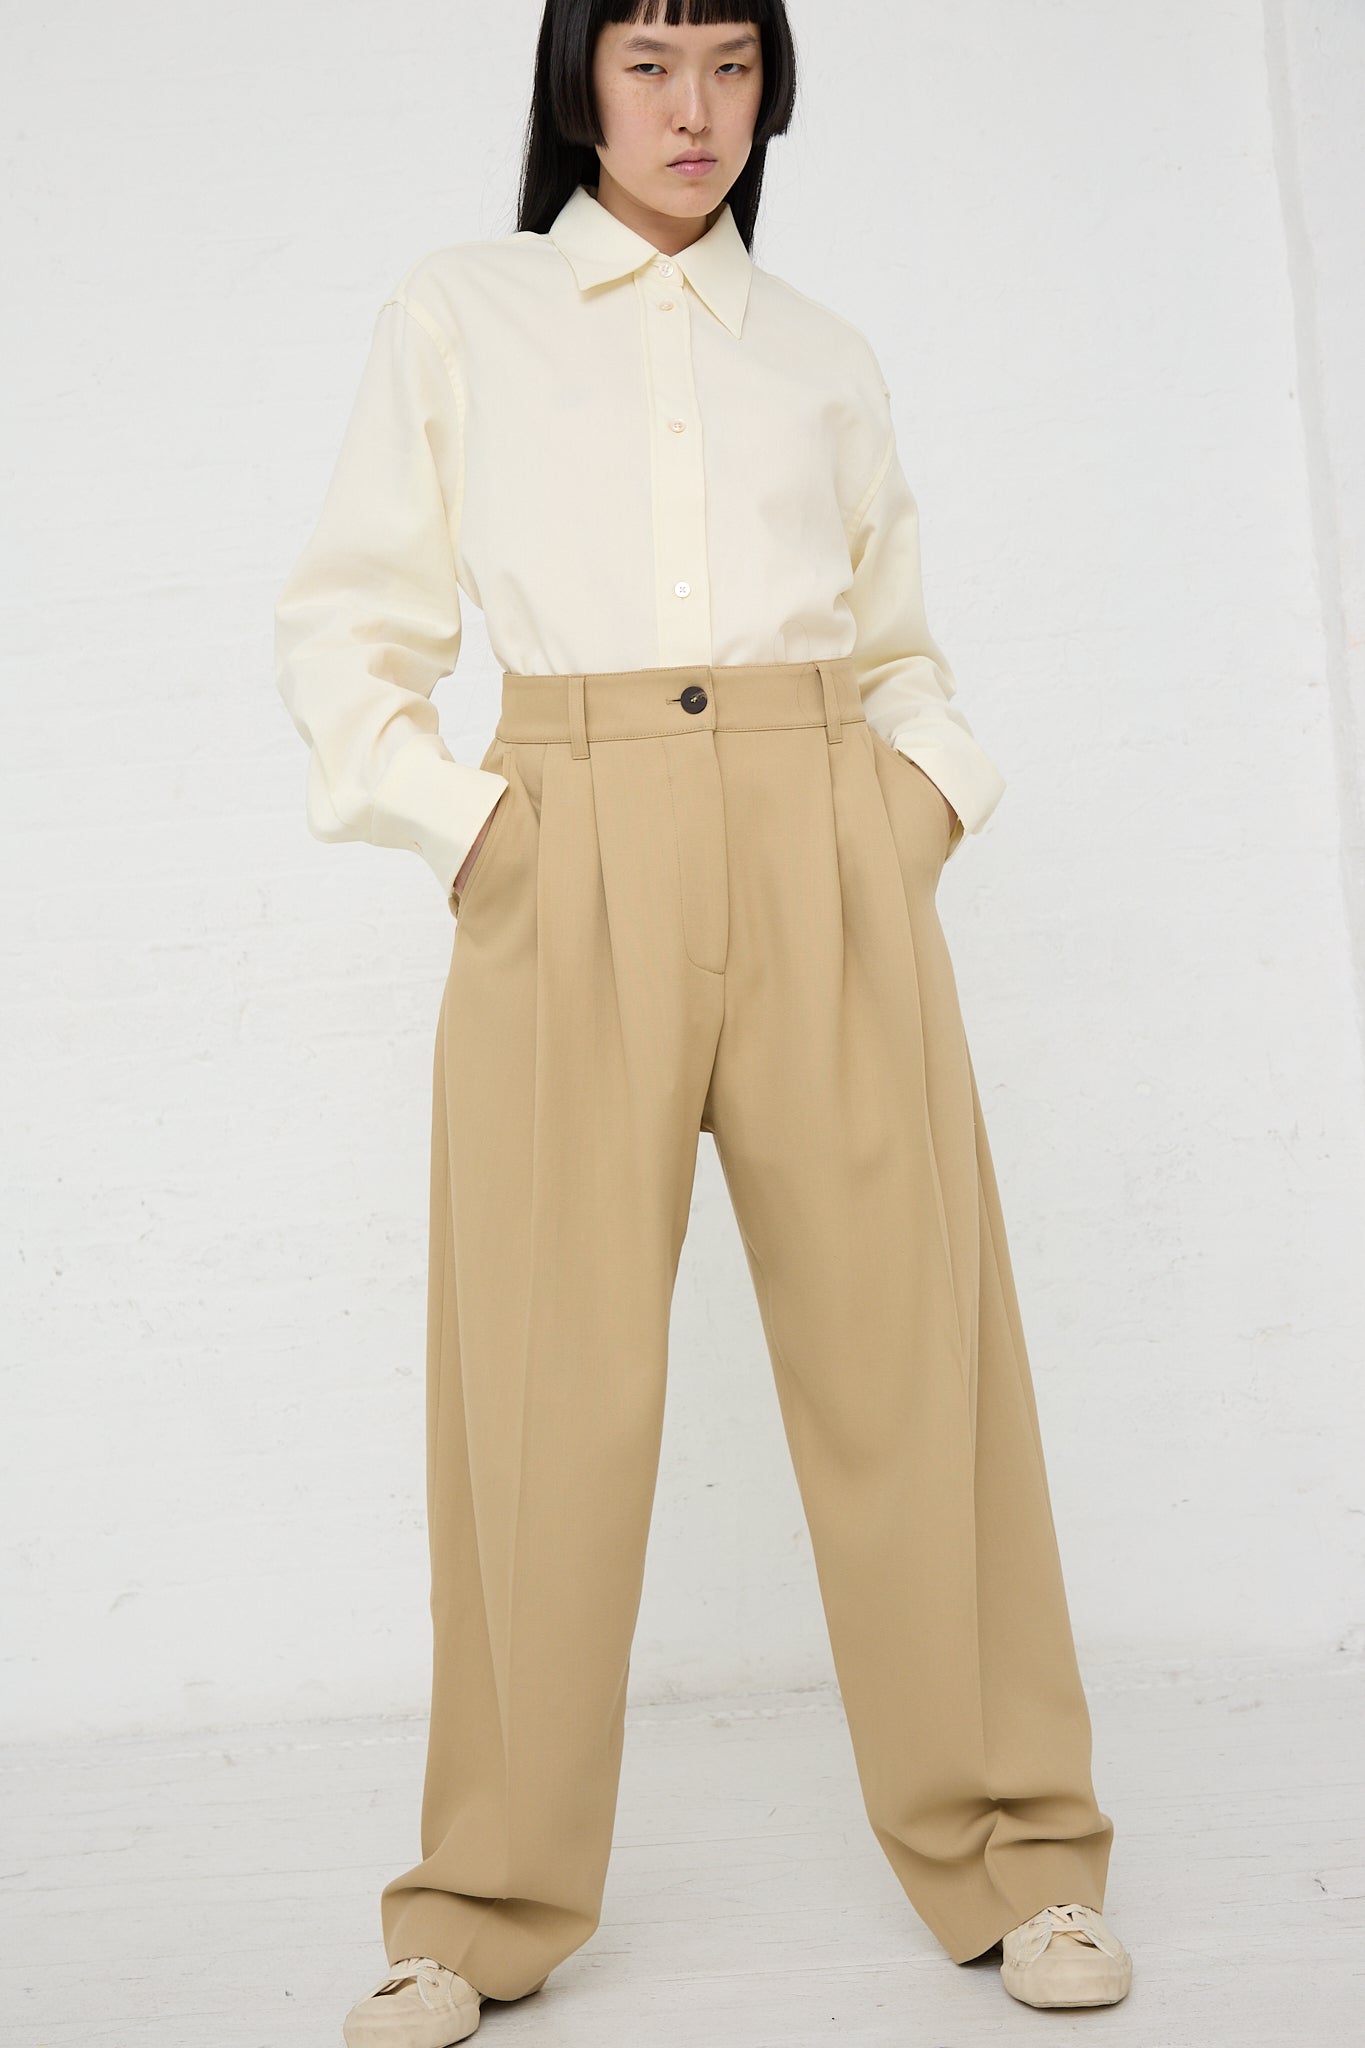 A model wearing Acuna Double Pleat Front Trouser in Sand and a cream colored button up blouse by Studio Nicholson. Full length and front view.